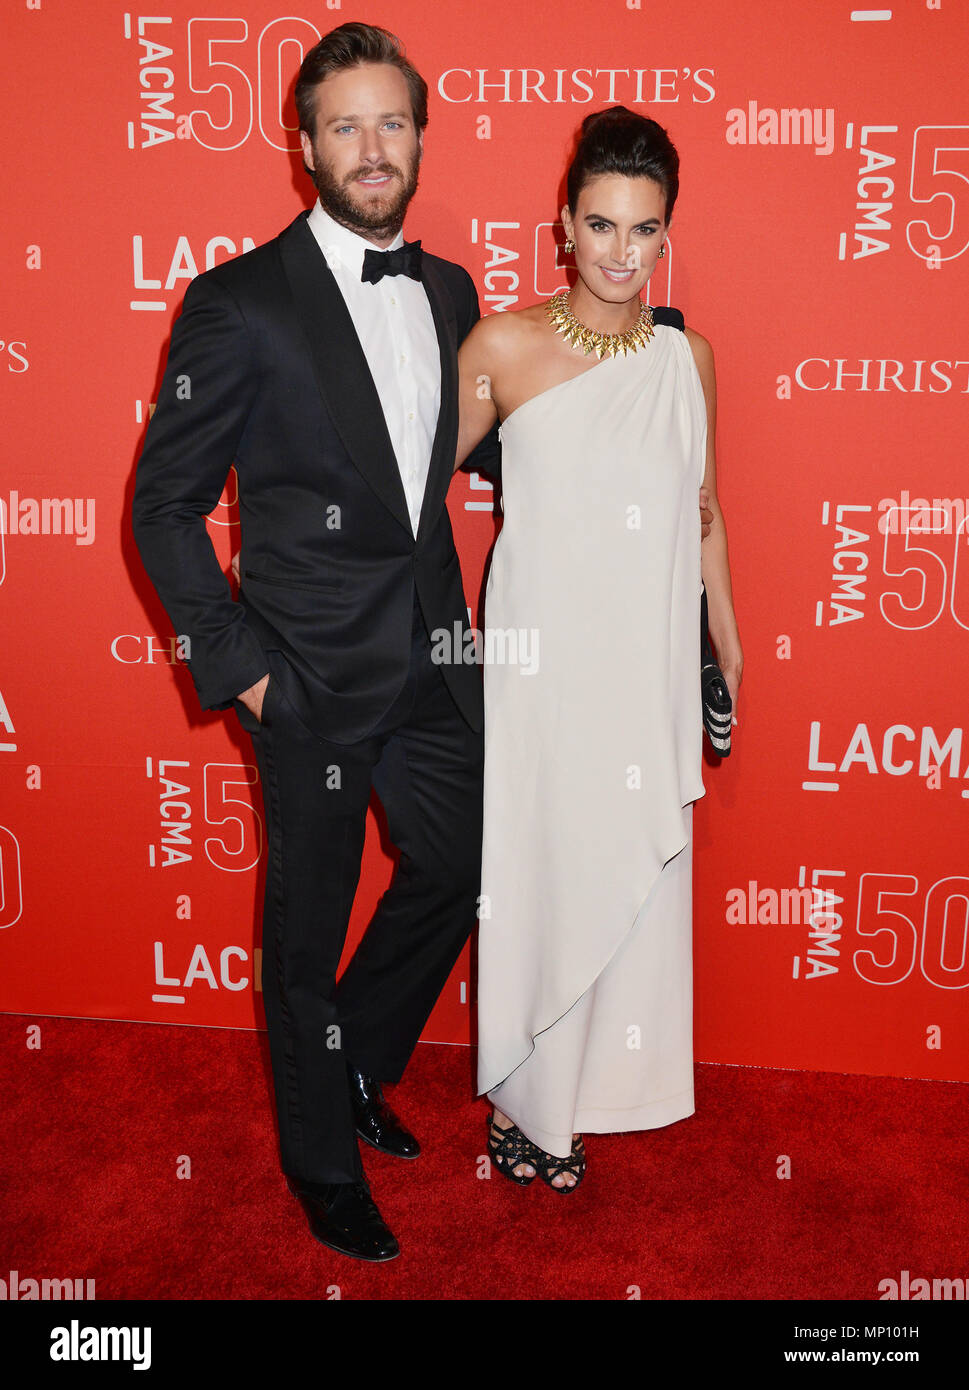 Armie Hammer and Wife Elizabeth Chambers 050 at the  LACMA 50th Ann. Gala 2015 at the LACMA Museum in Los Angeles. April 18, 2015.Armie Hammer and Wife Elizabeth Chambers 050 ------------- Red Carpet Event, Vertical, USA, Film Industry, Celebrities,  Photography, Bestof, Arts Culture and Entertainment, Topix Celebrities fashion /  Vertical, Best of, Event in Hollywood Life - California,  Red Carpet and backstage, USA, Film Industry, Celebrities,  movie celebrities, TV celebrities, Music celebrities, Photography, Bestof, Arts Culture and Entertainment,  Topix, vertical,  family from from the ye Stock Photo